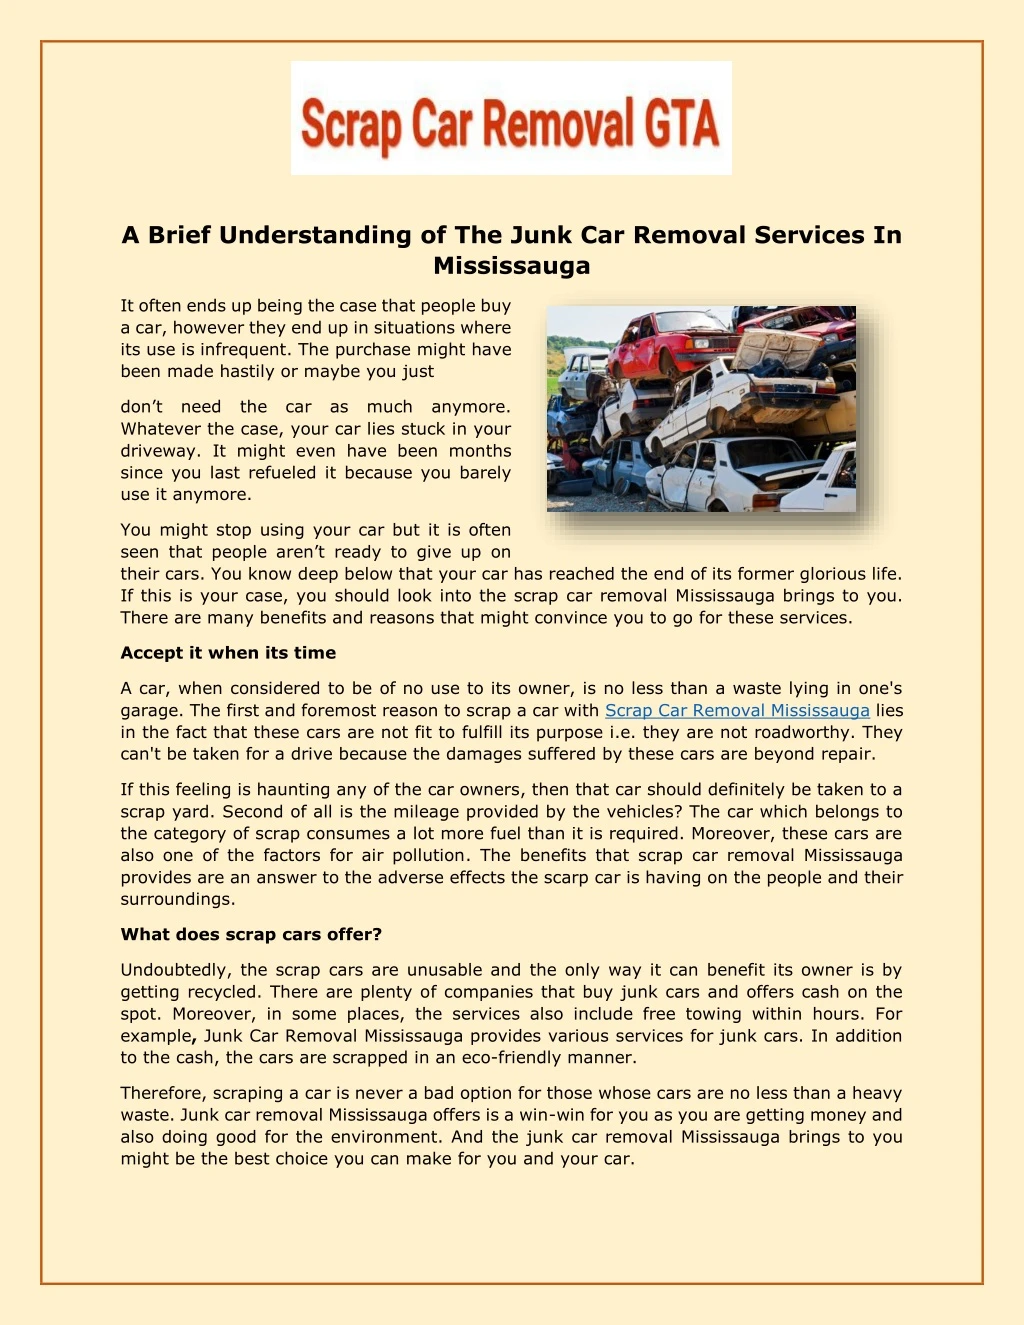 a brief understanding of the junk car removal